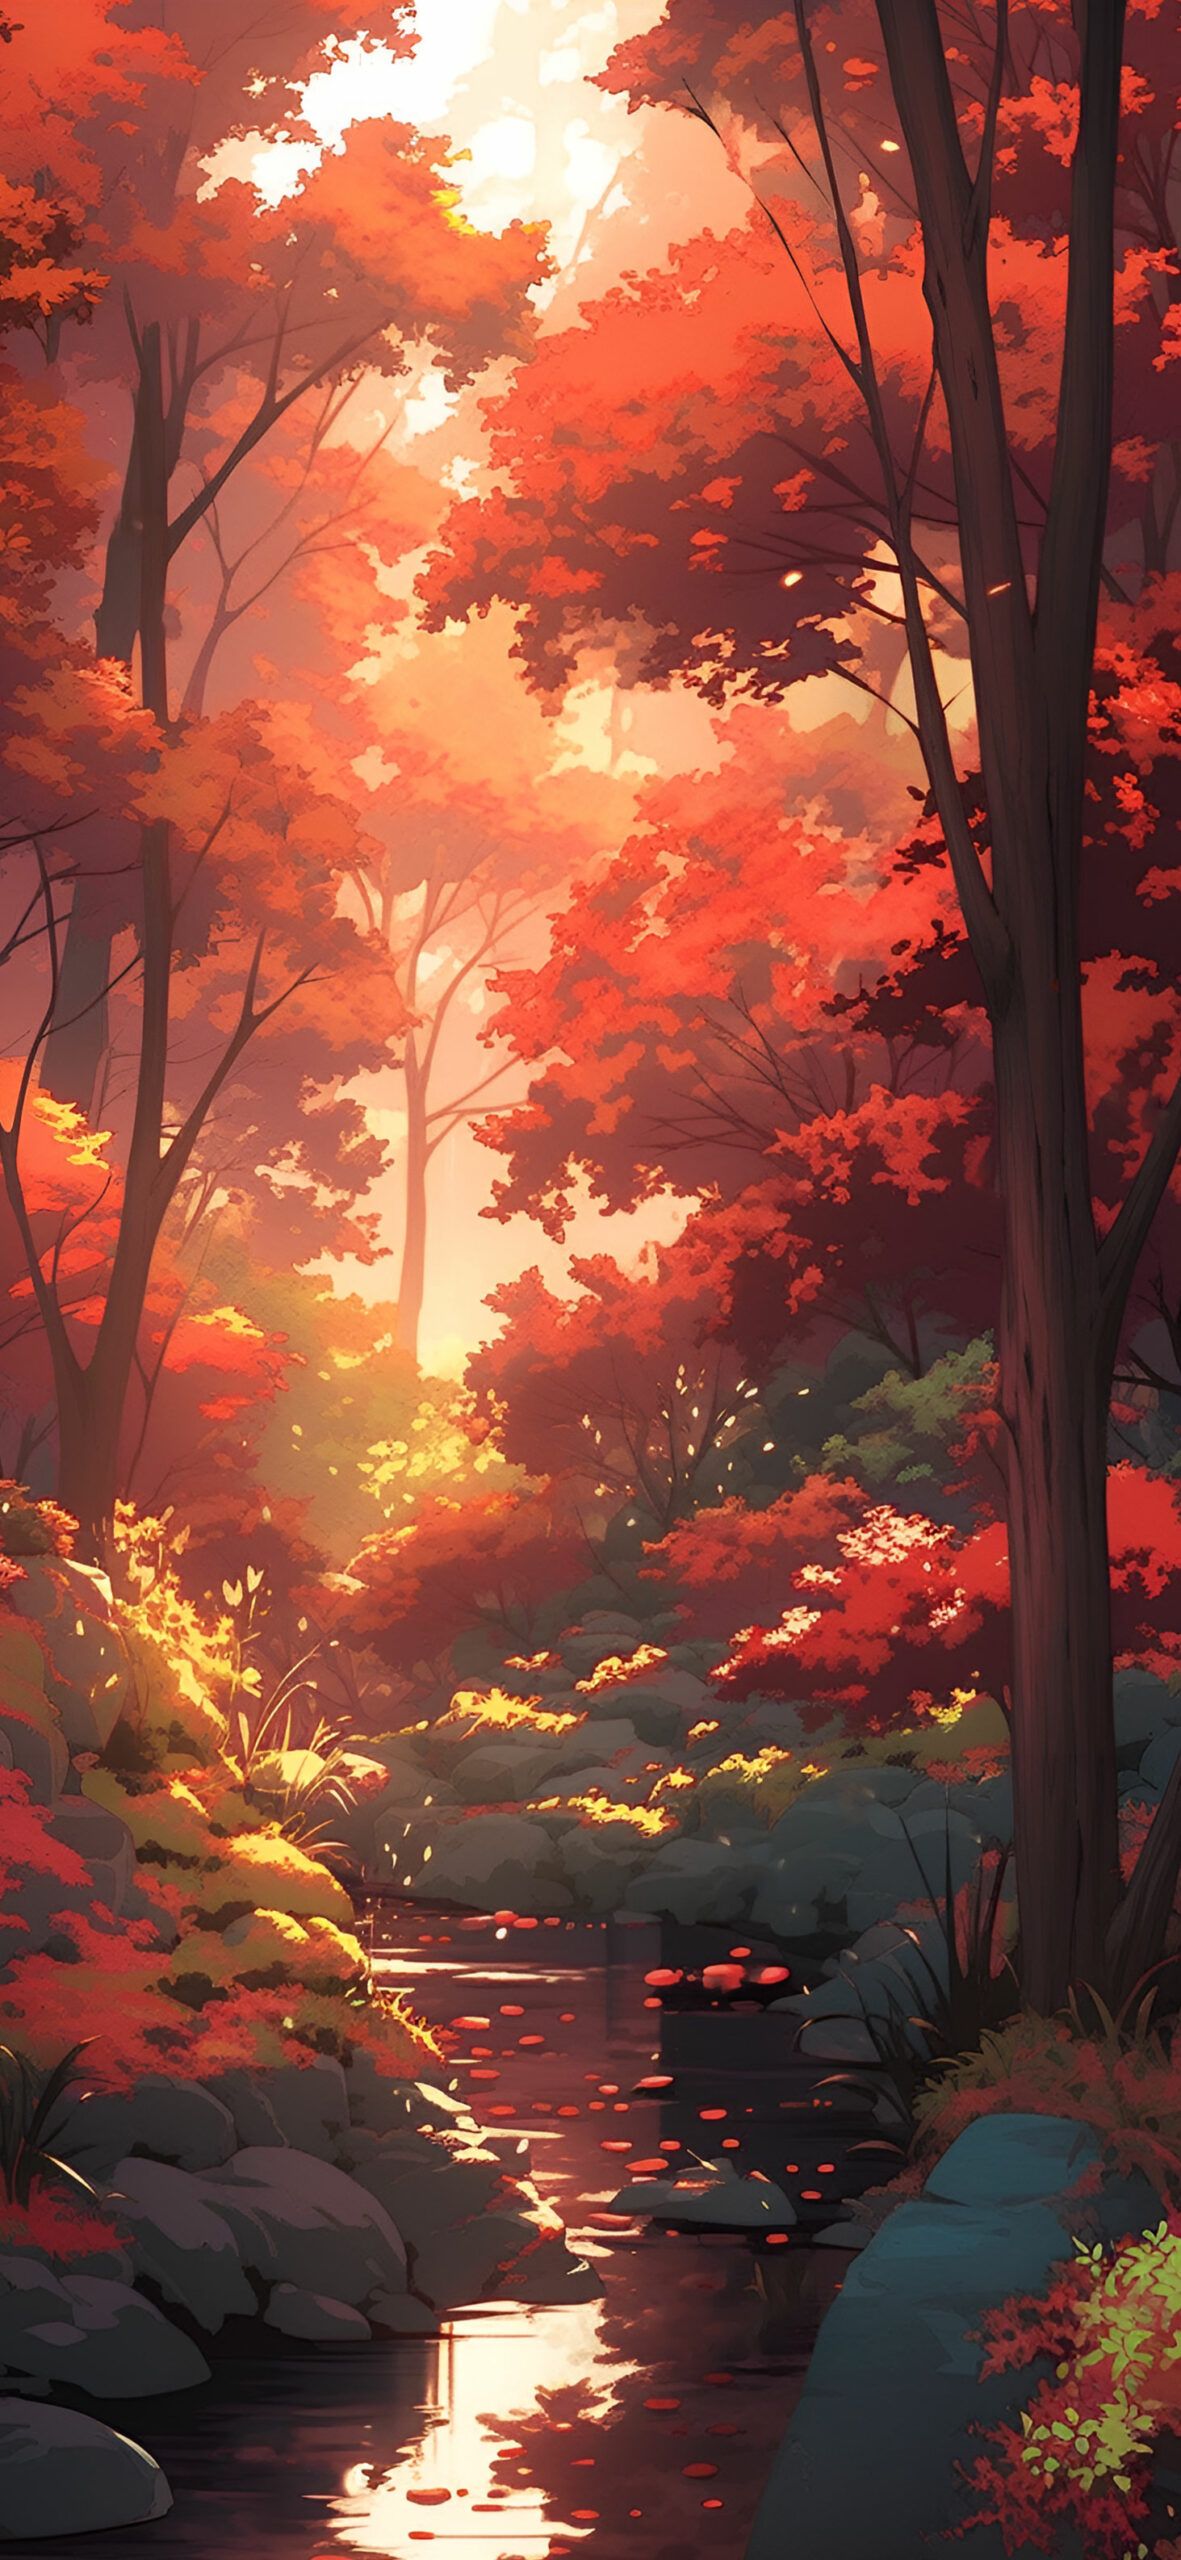 Cozy Autumn Forest with a Stream Wallpaper Wallpaper HD